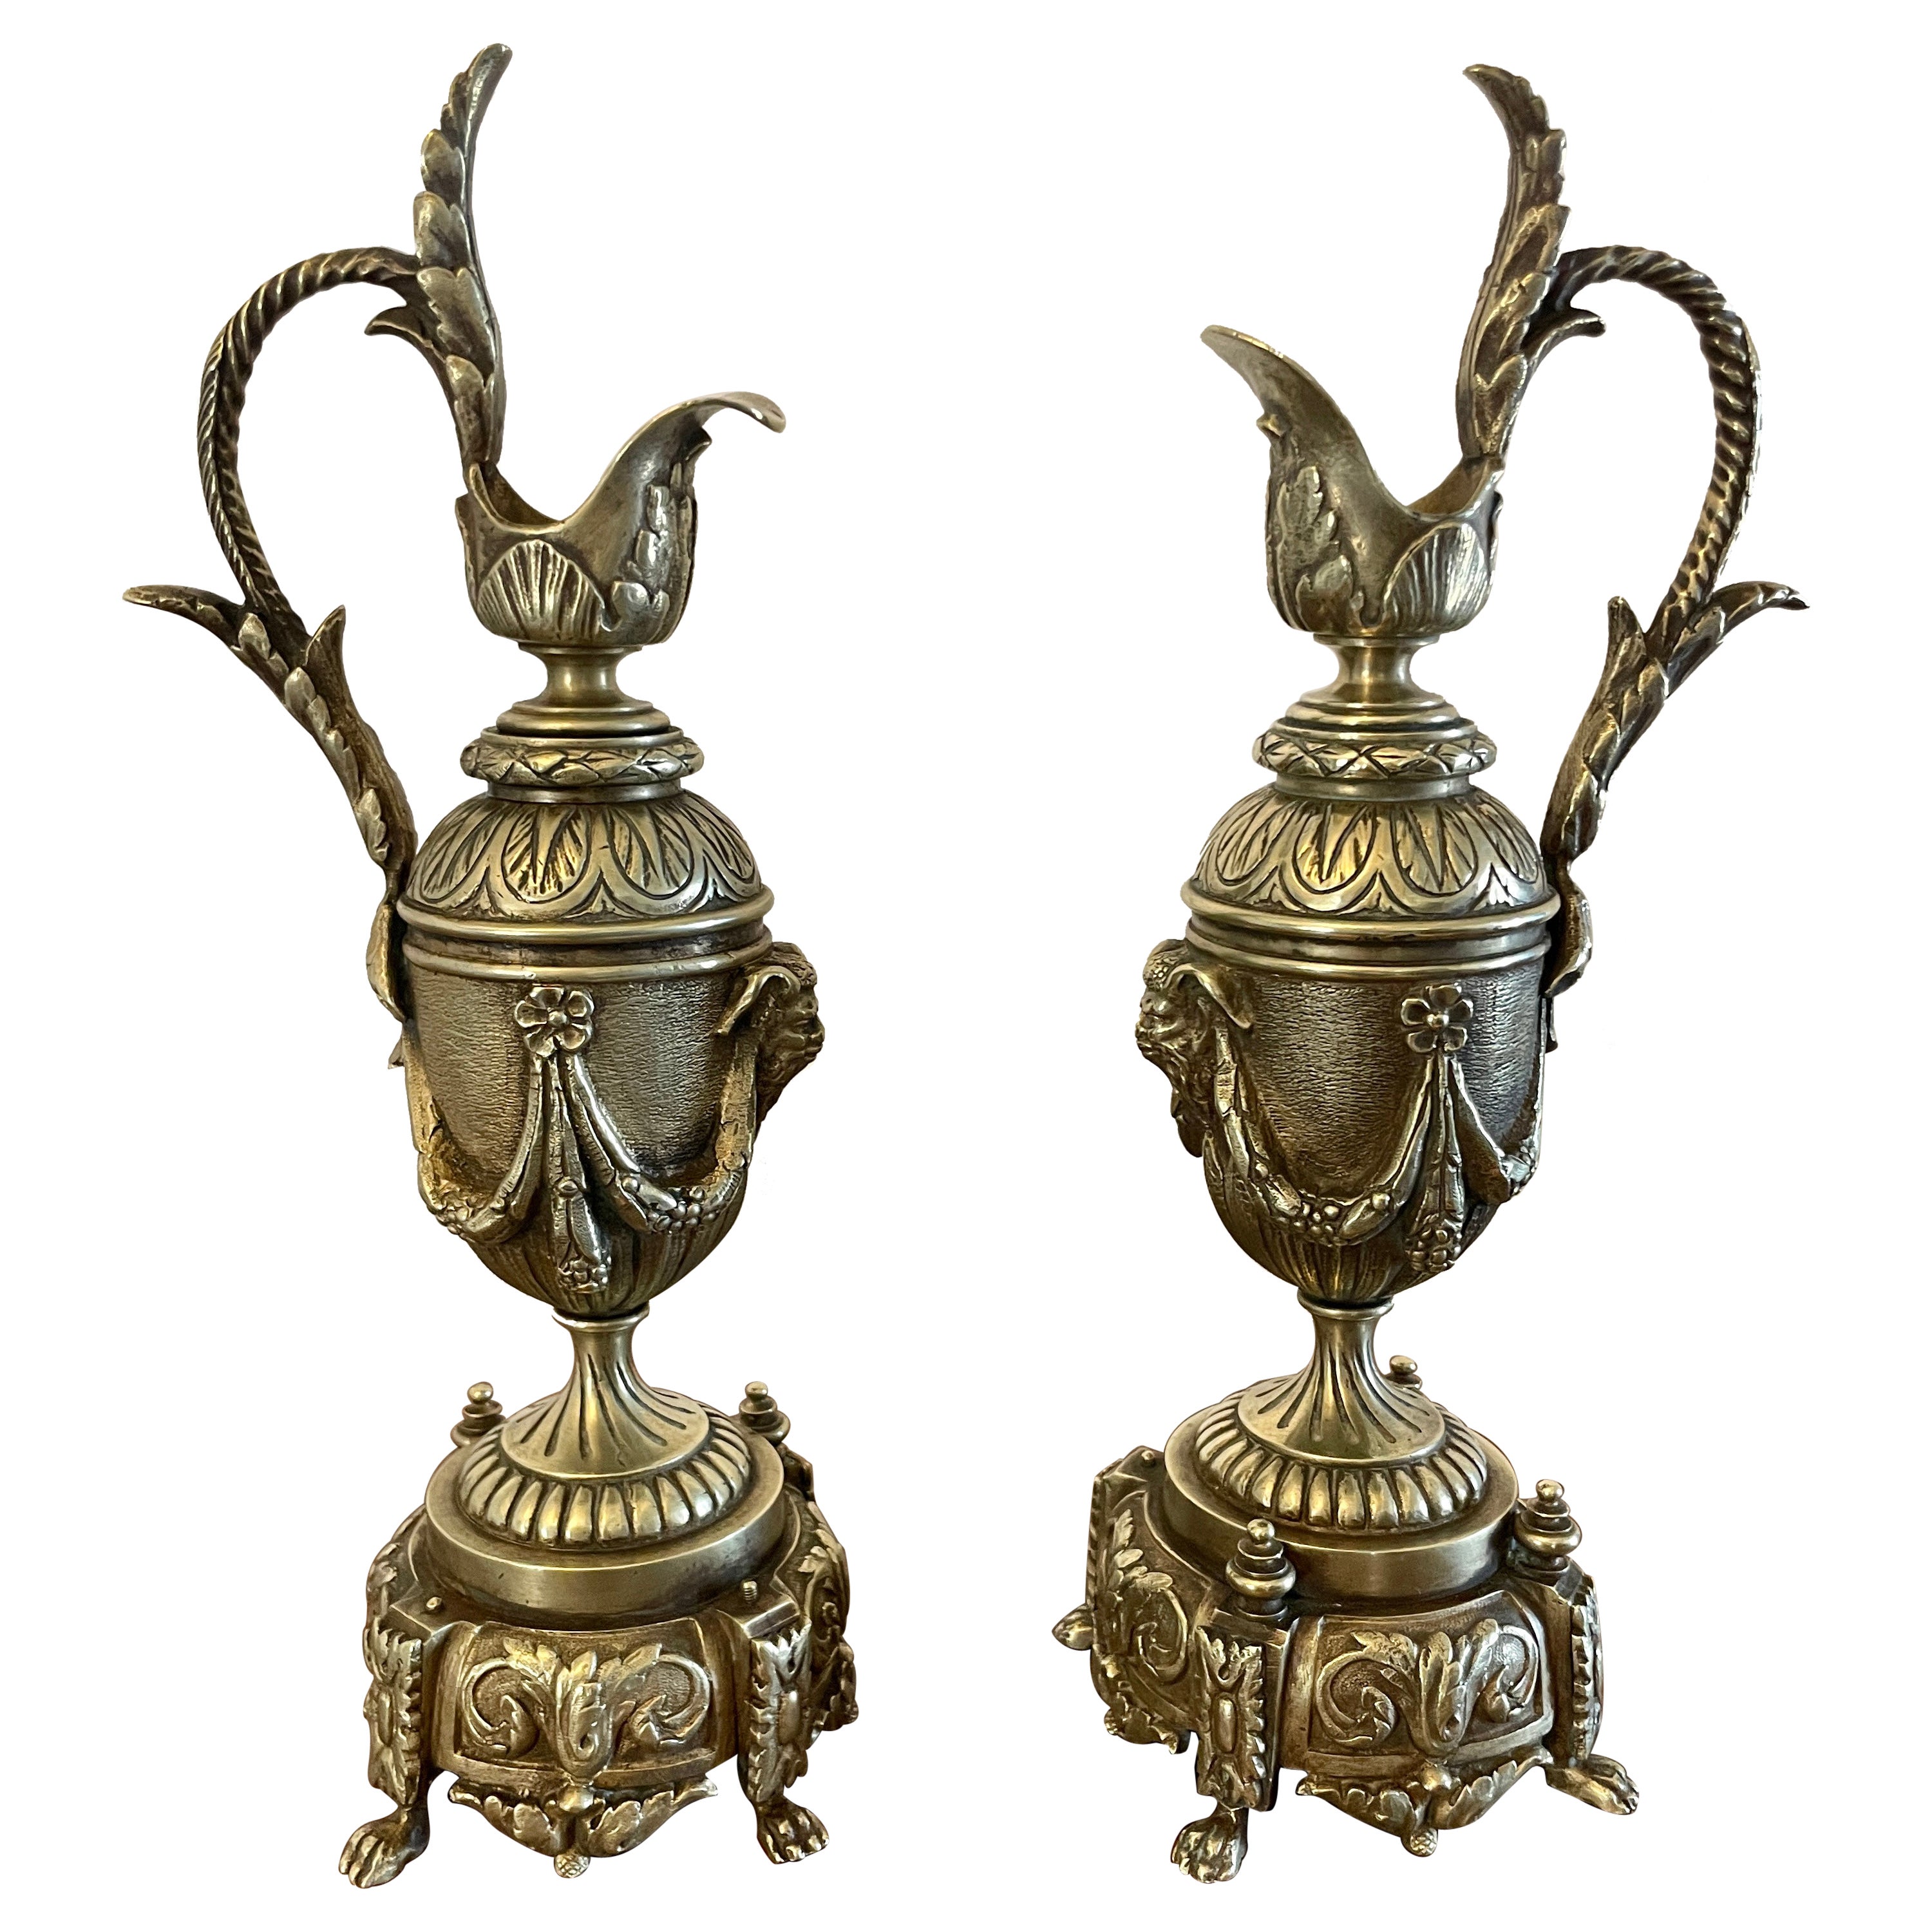 Pair of Antique Victorian Quality Ornate Brass Ewers 